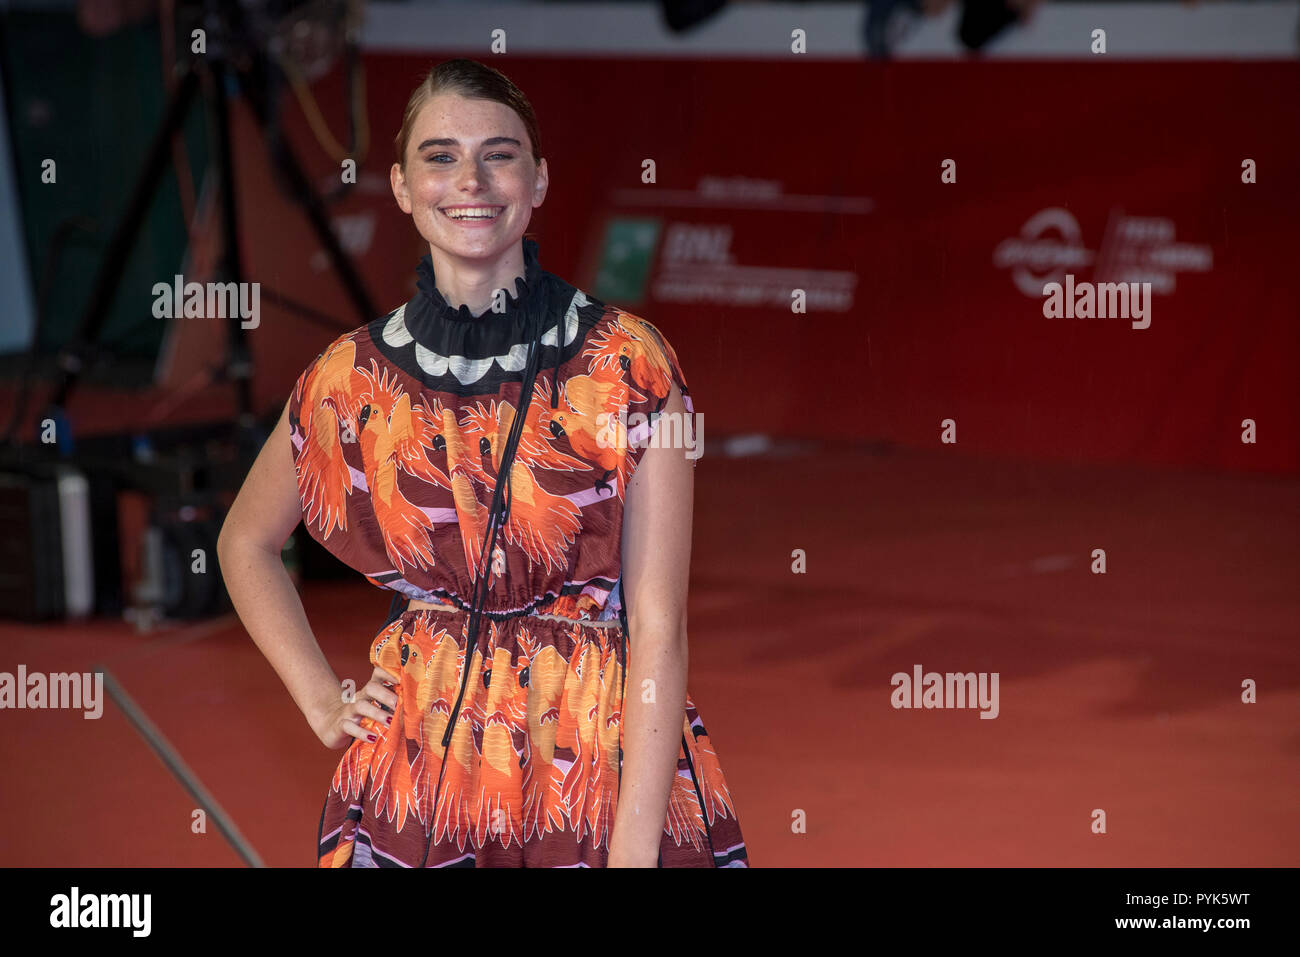 Rome, Italy. 27th October, 2018. Red carpet of Notti Magiche at Rome Film Fest 2018 Credit: Silvia Gerbino/Alamy Live News Stock Photo